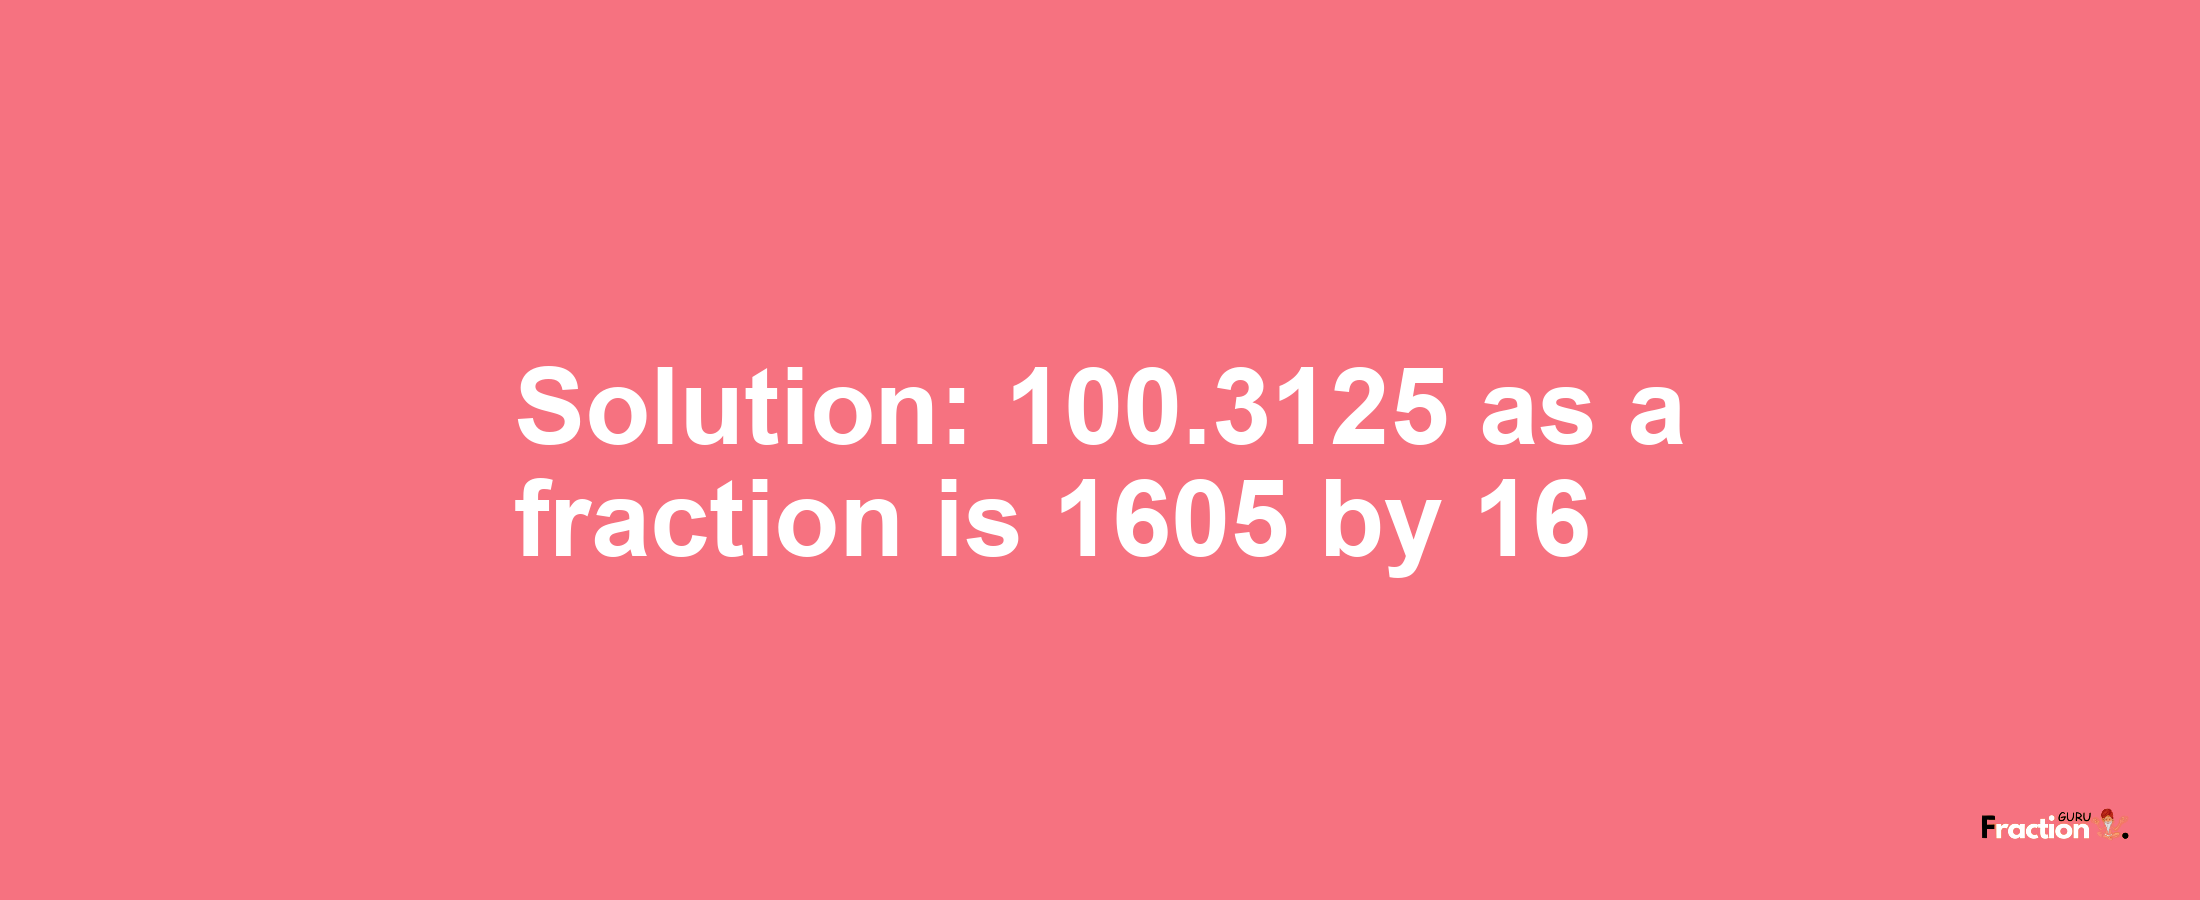 Solution:100.3125 as a fraction is 1605/16